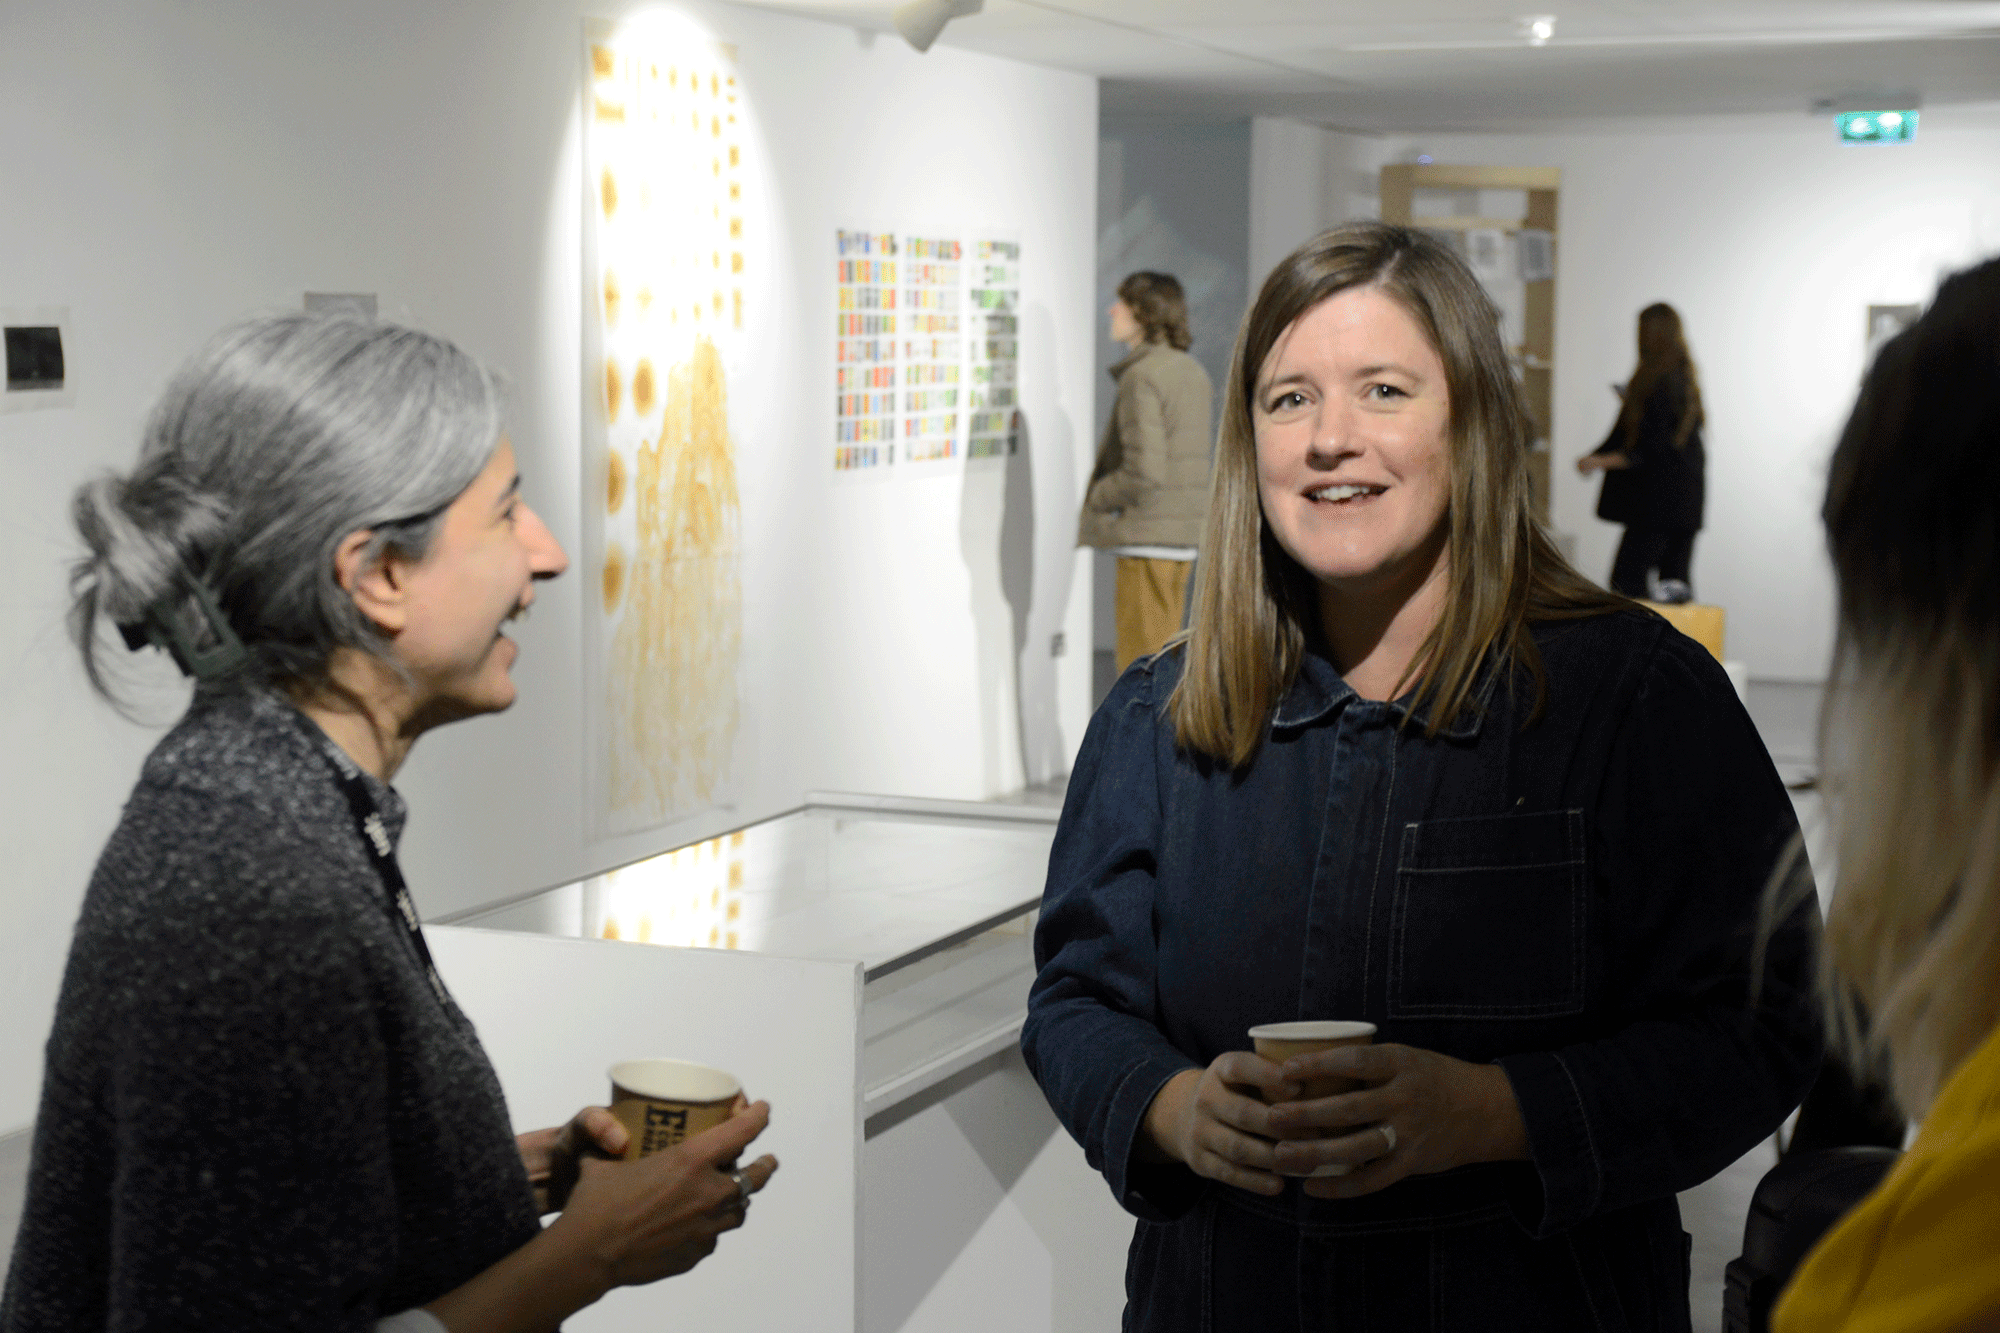 A person looks towards the camera holding a cup, while another person looks towards them. In the background, you can see other people looking at artwork on the walls.